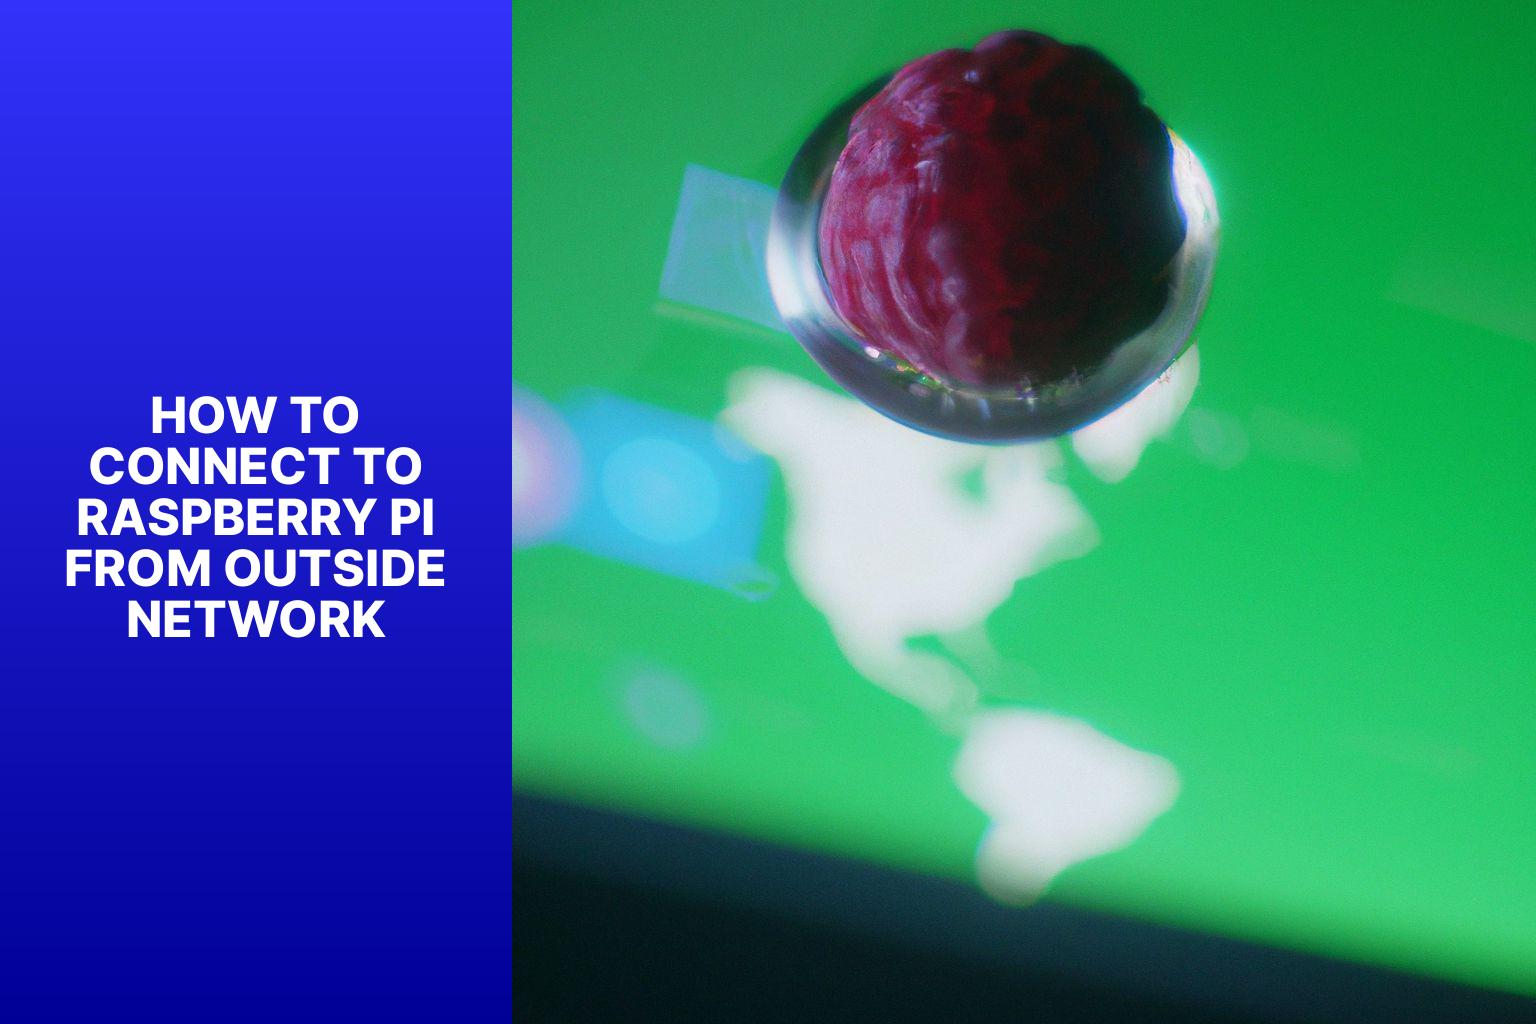 Update Raspberry Pi how to connect to raspberry pi from outside networkhtd8